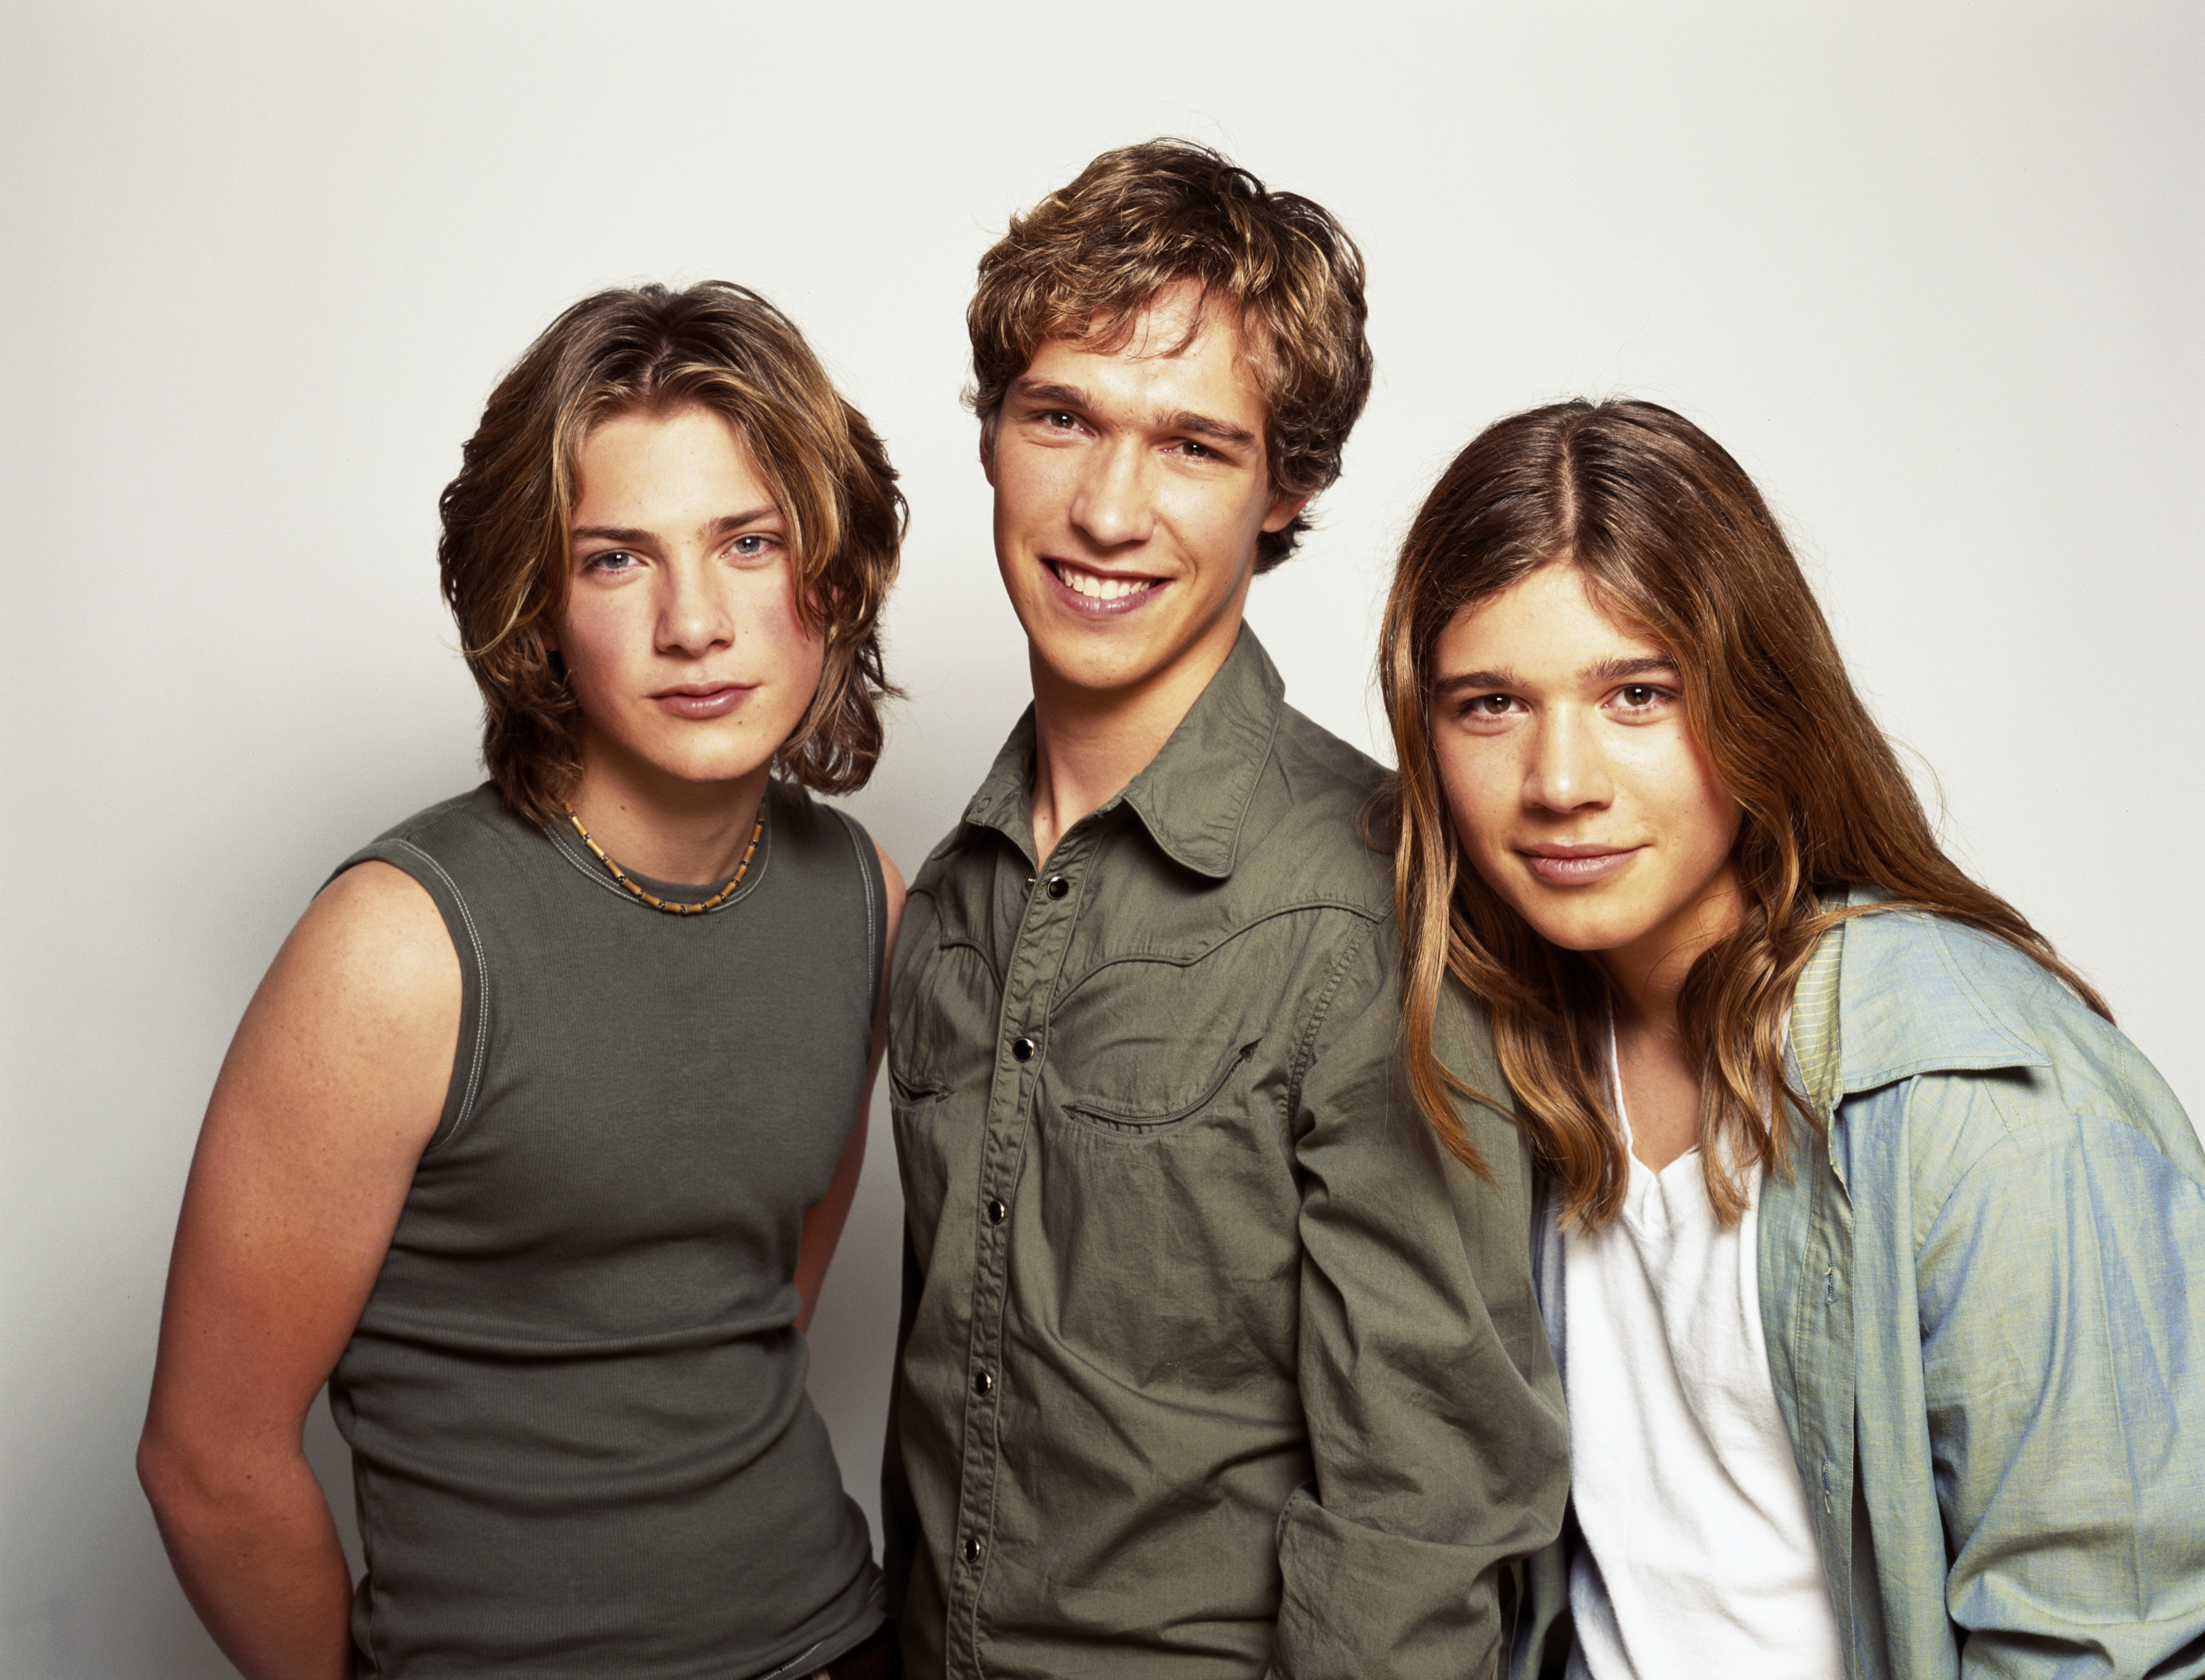 The band released MmmBop 27 years ago